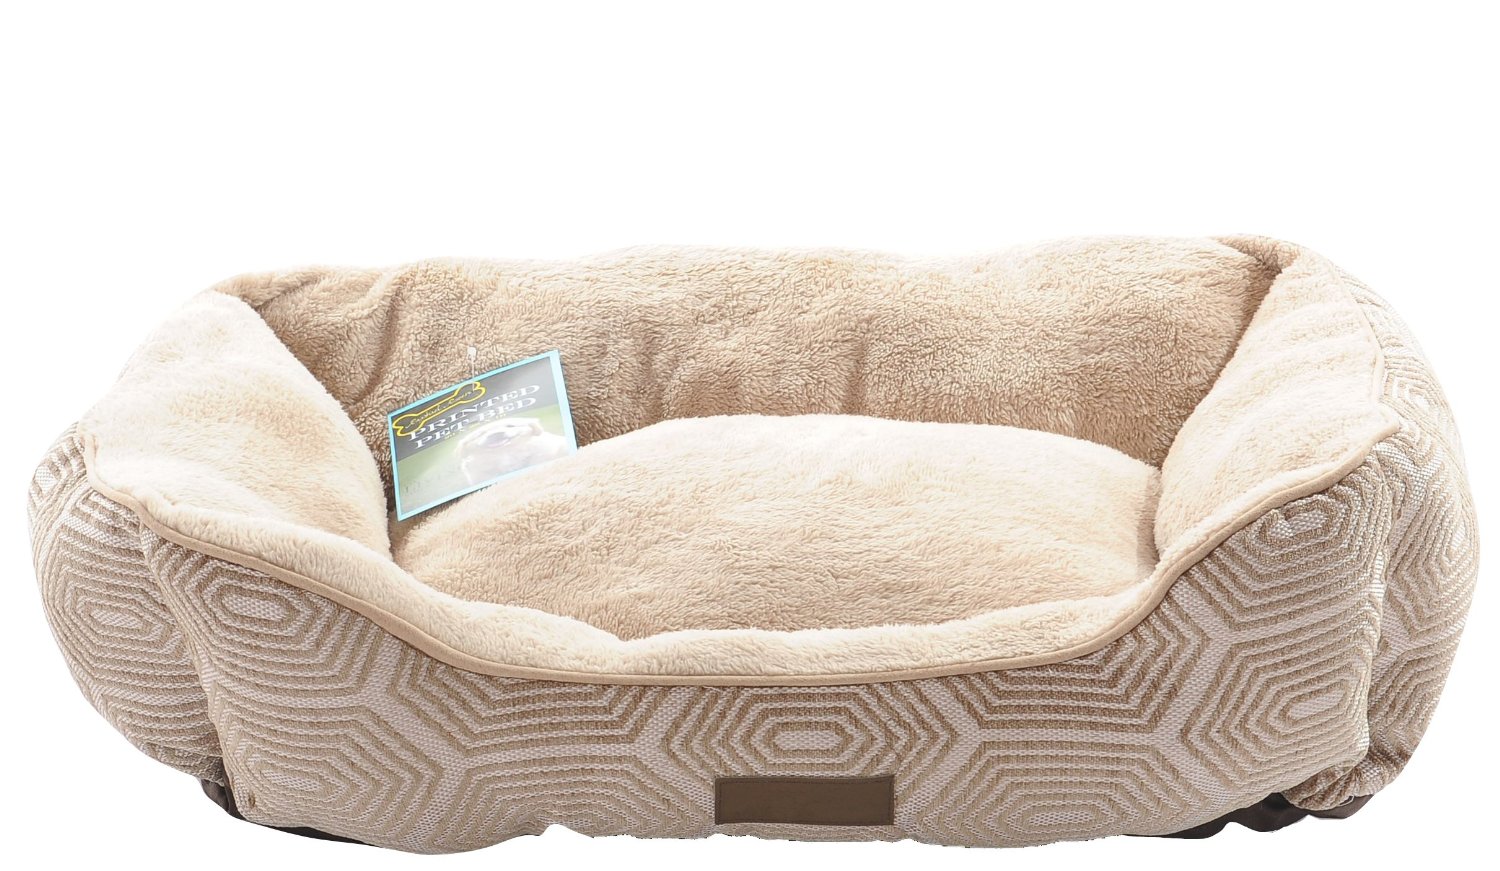 Not Just Another Southern Gal: Comfy Pooch Plush Soft Pet Bed Review